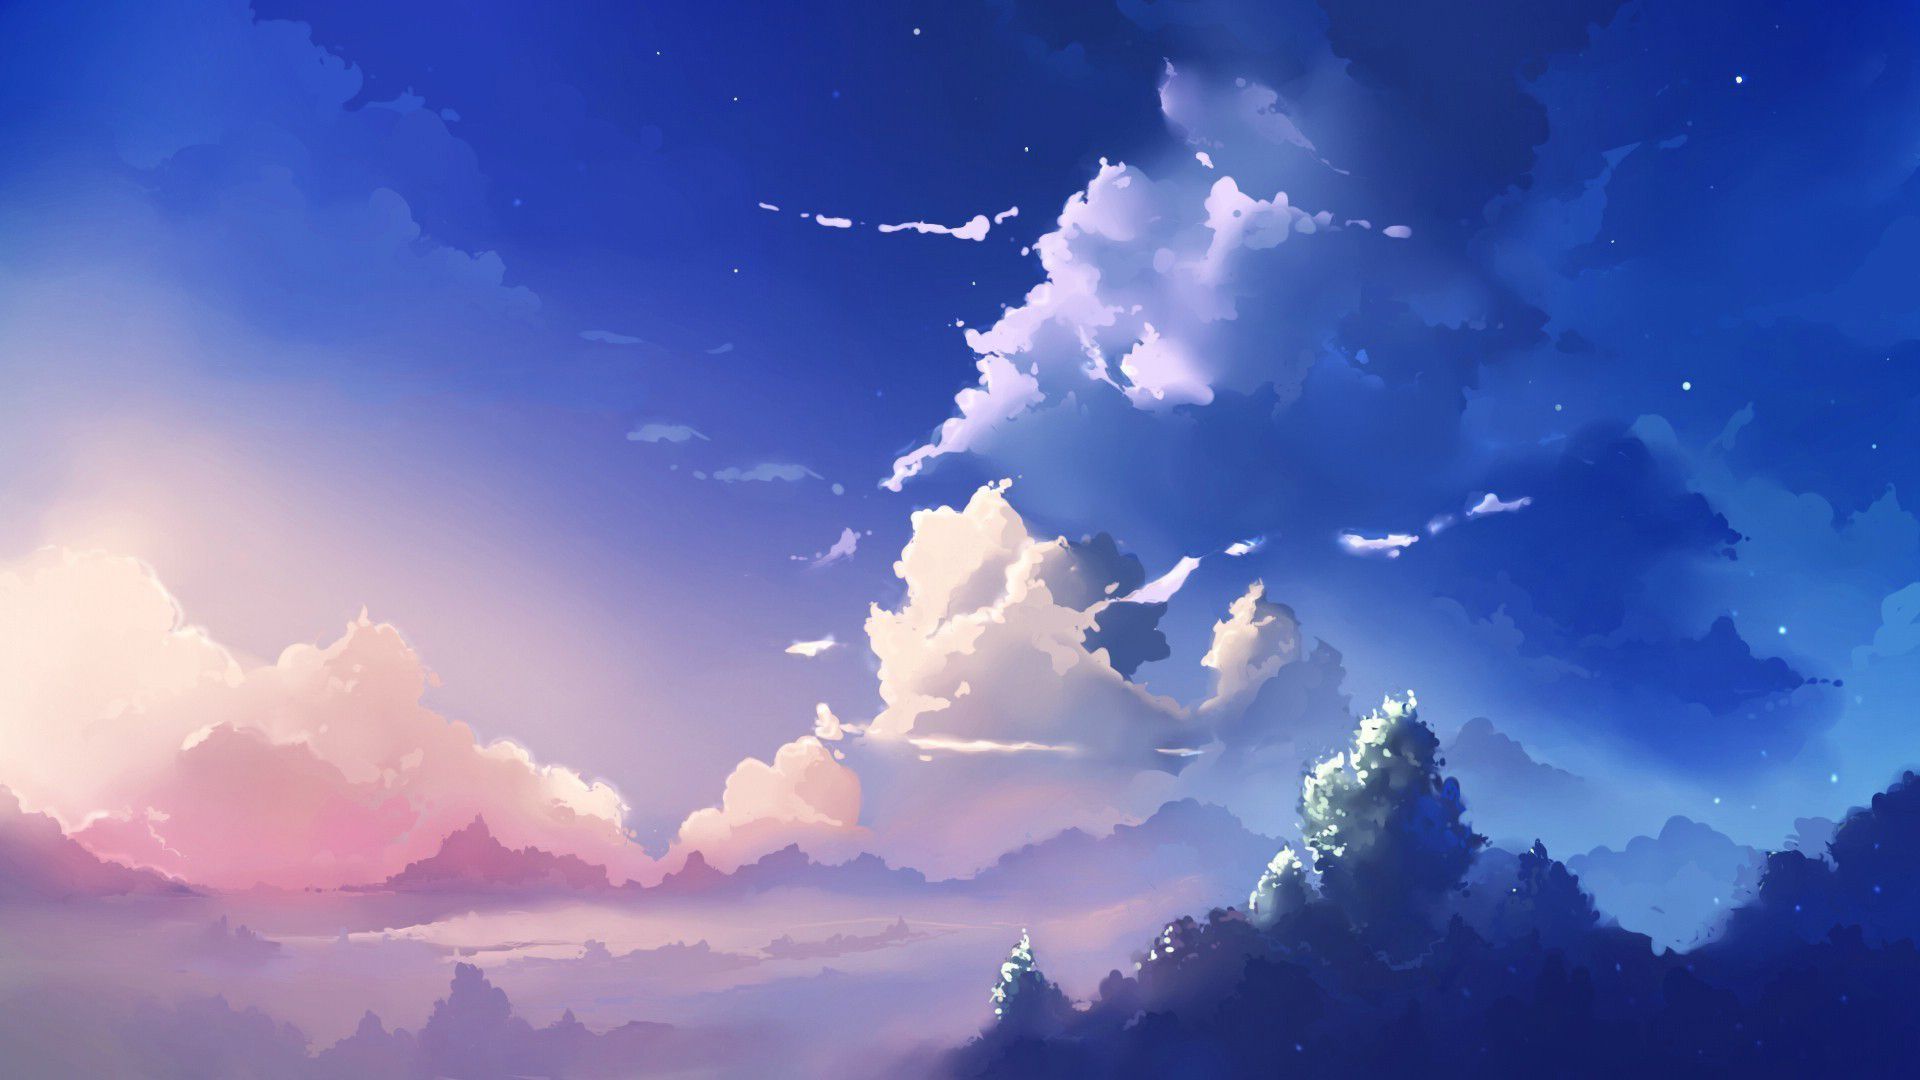 Anime Clouds 4k Wallpapers - Wallpaper Cave